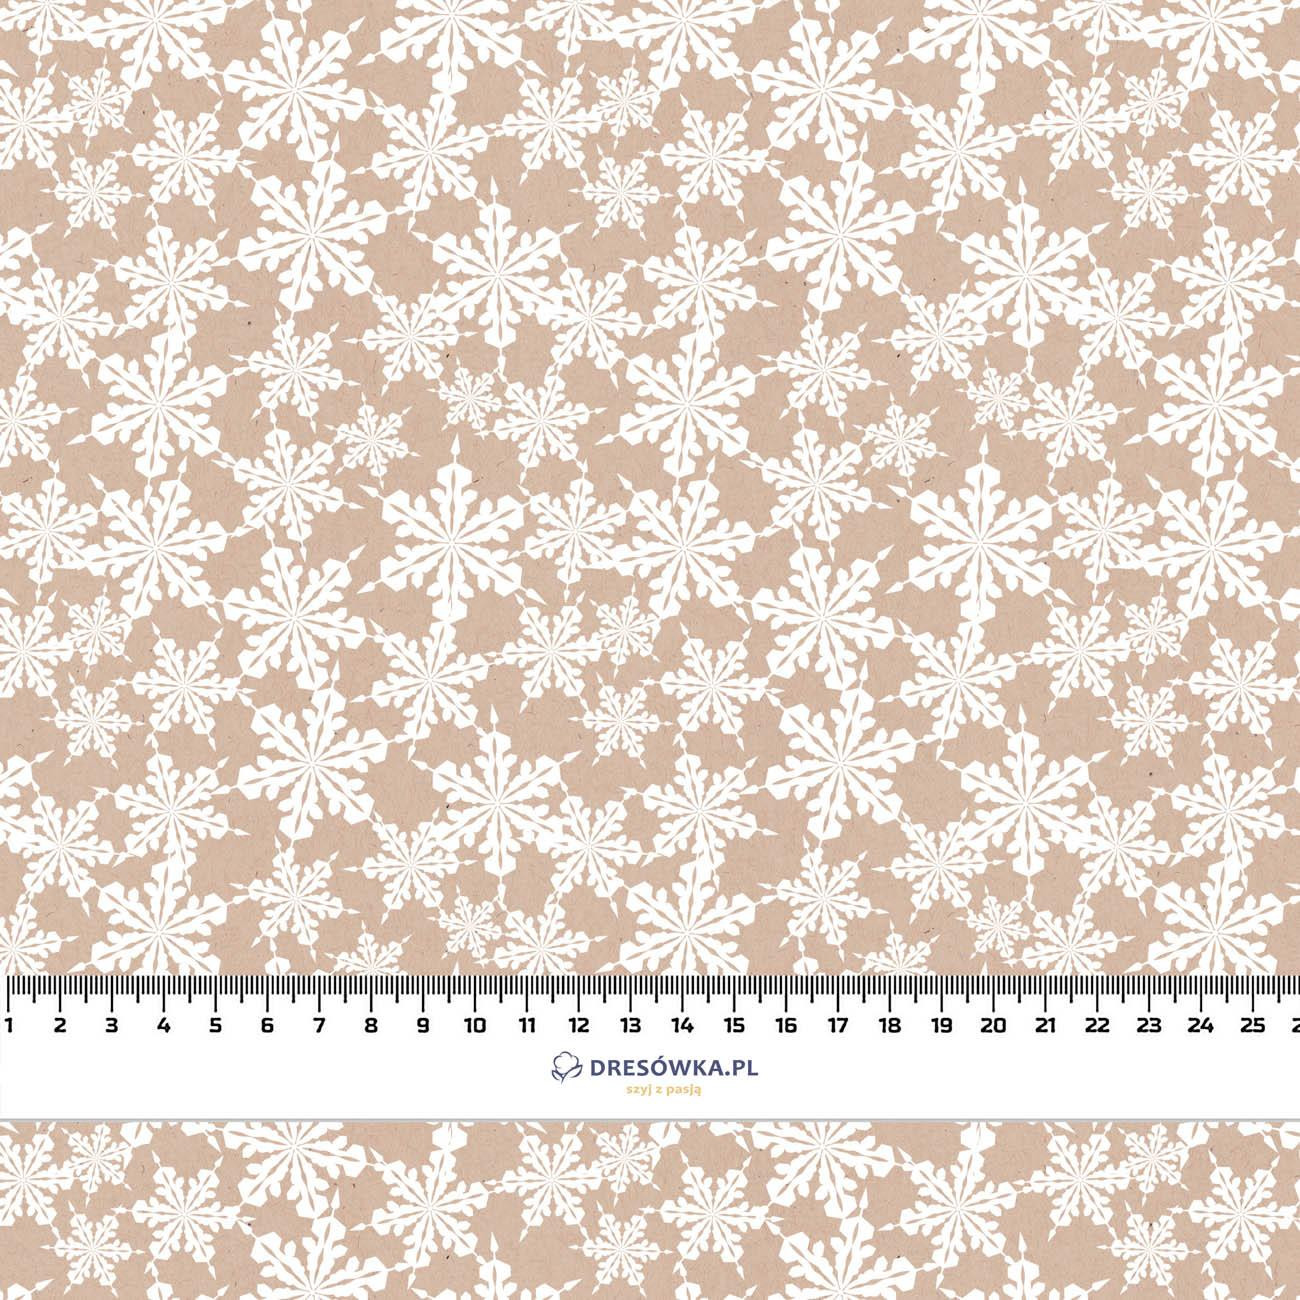 PAPER SNOWFLAKES (WHITE CHRISTMAS) - Woven Fabric for tablecloths